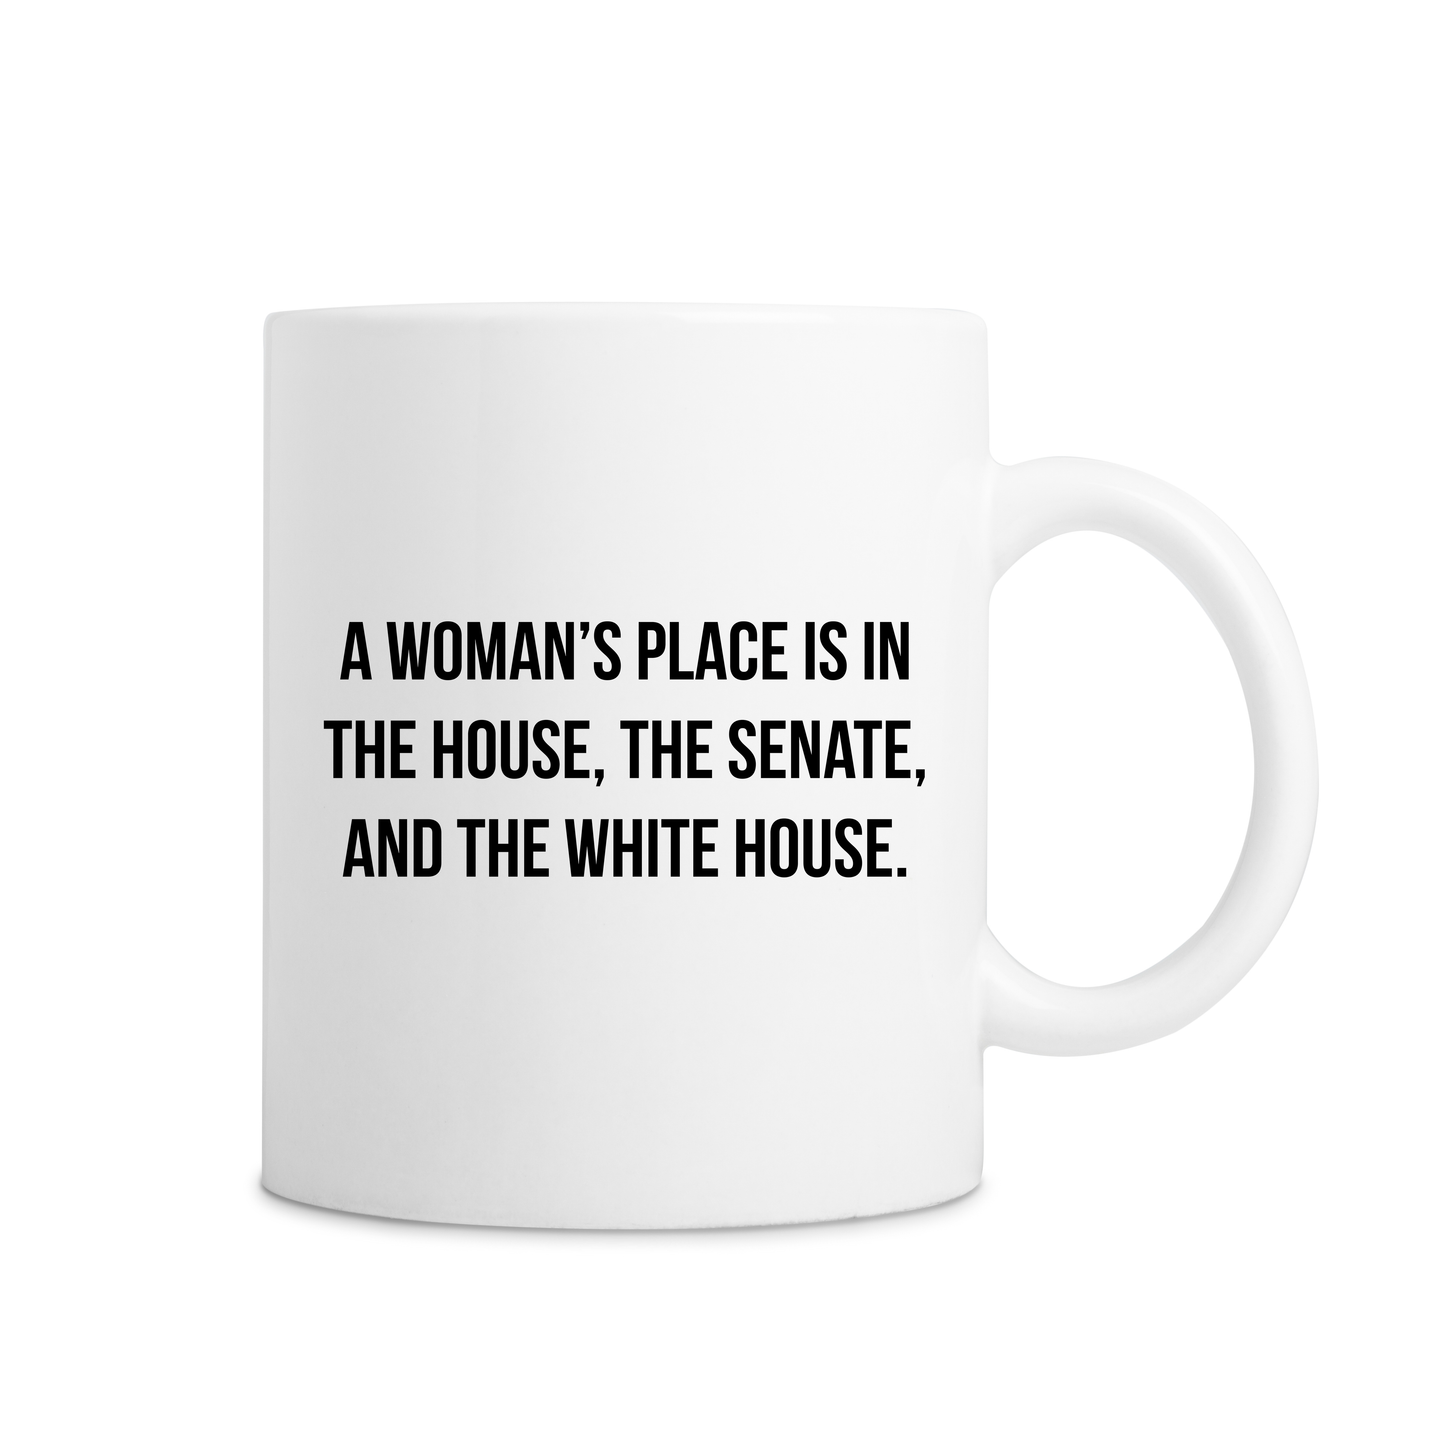 A Woman's Place Is In The House, The Senate, And The White House Mug - White